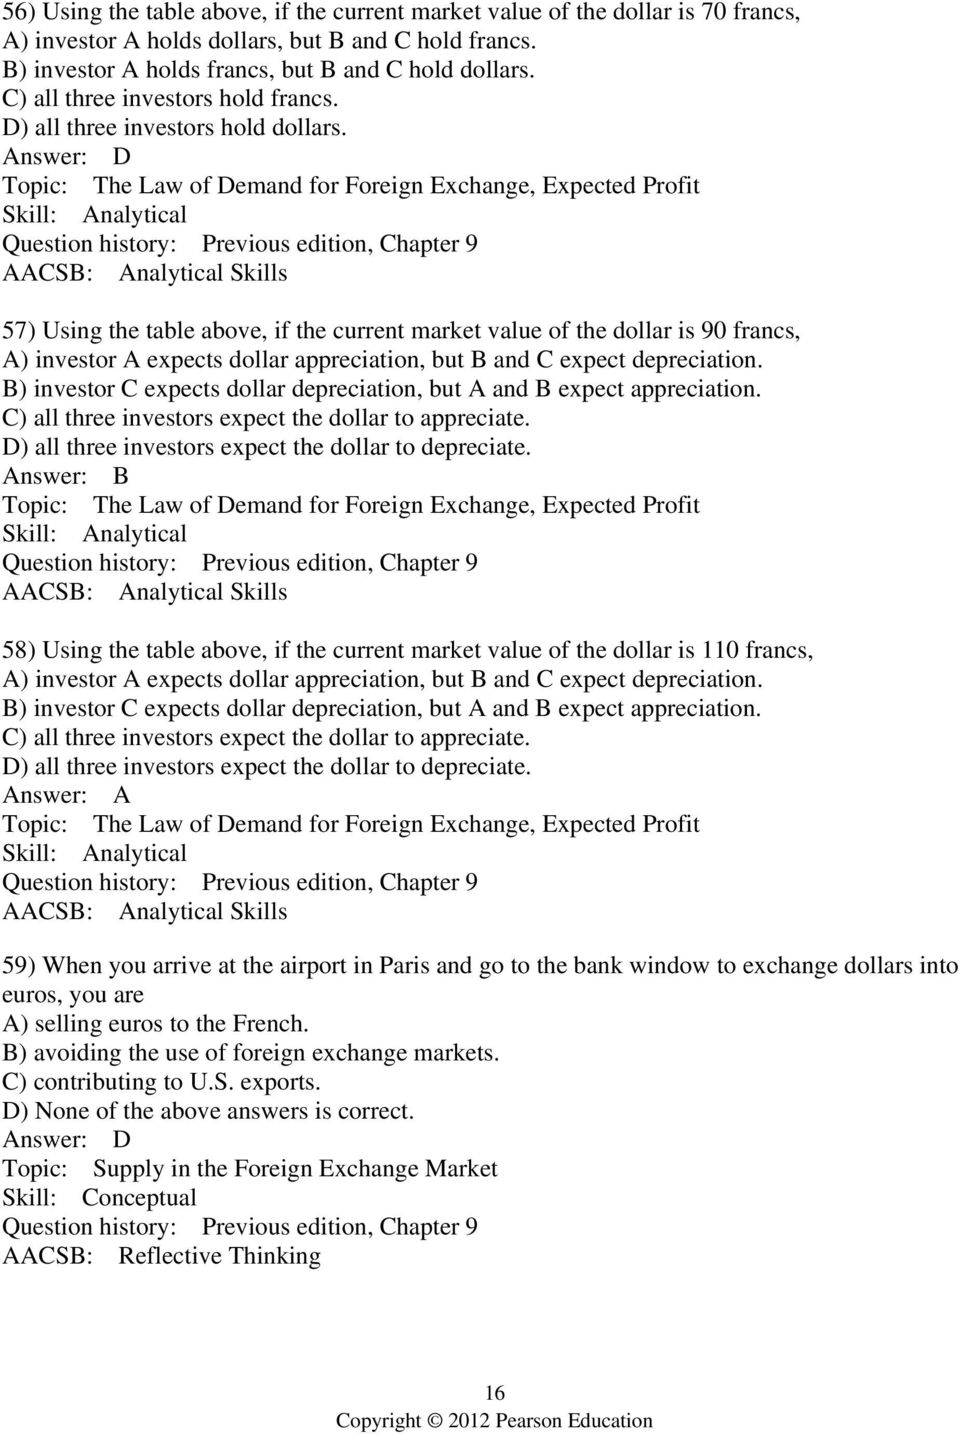 Answer: D Topic: The Law of Demand for Foreign Exchange, Expected Profit 57) Using the table above, if the current market value of the dollar is 90 francs, A) investor A expects dollar appreciation,